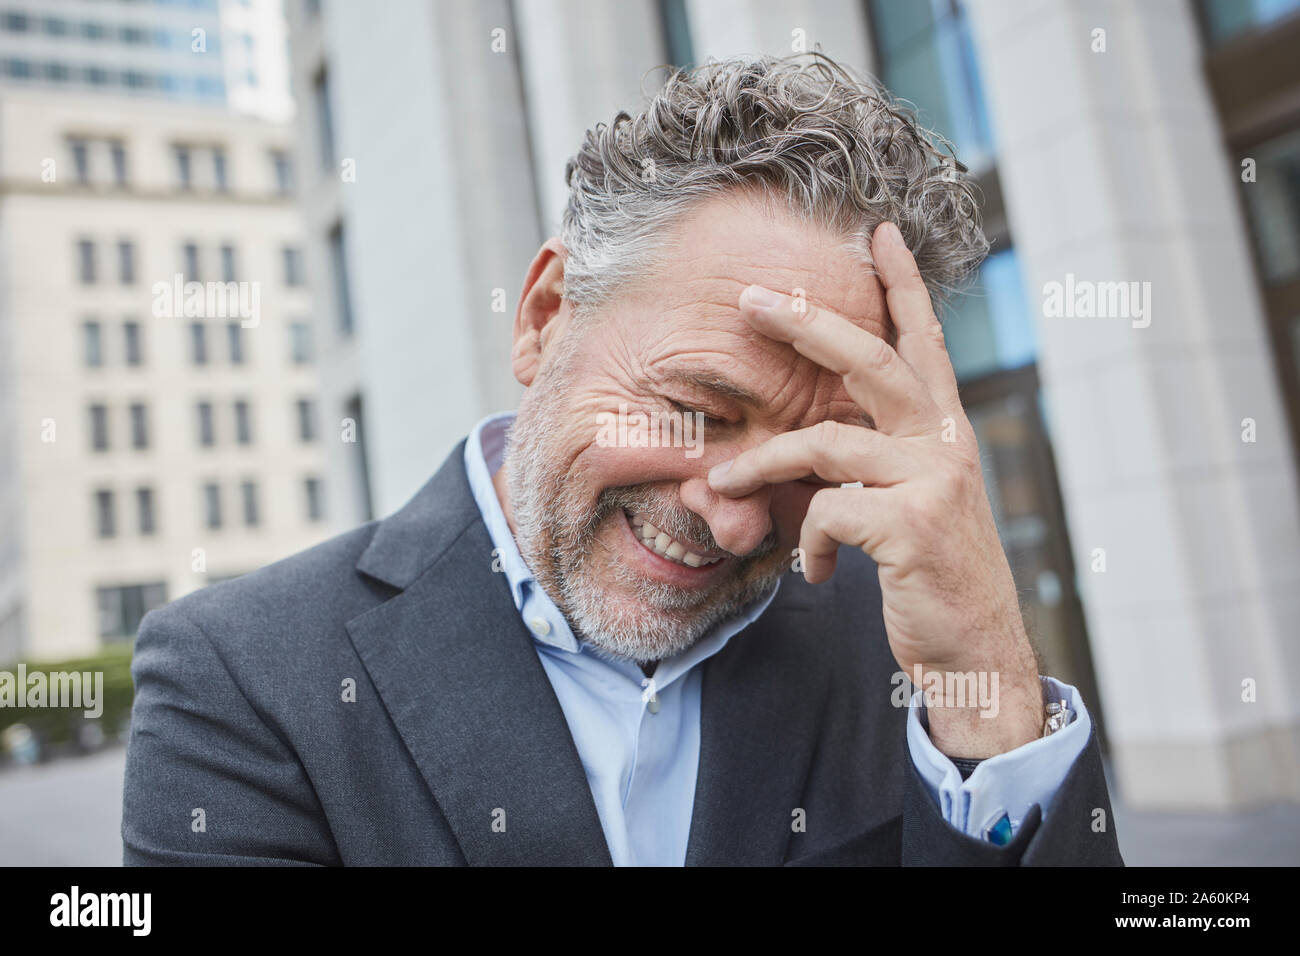 Portrait of happy businessman in the city Stock Photo